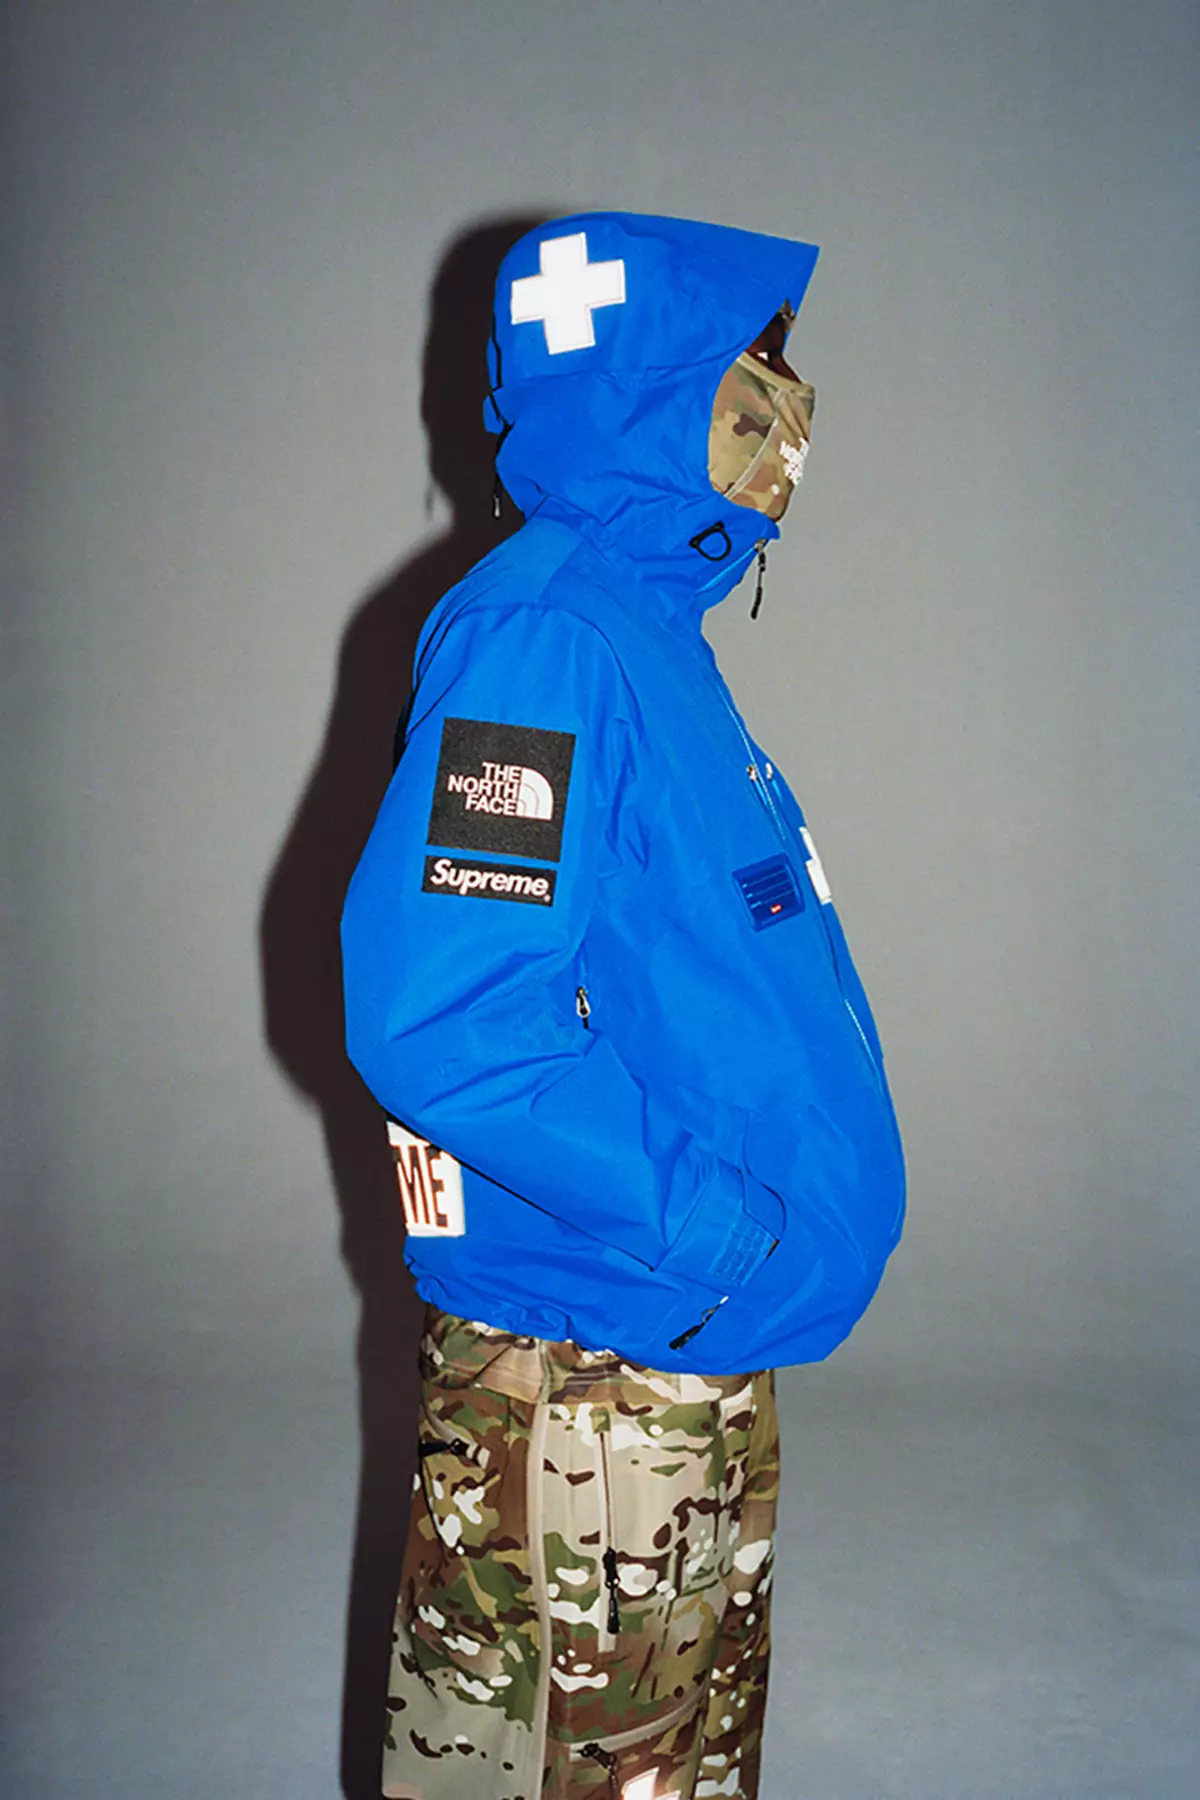 Release 9 Jun] Supreme x The North Face Trekking Collection Spring